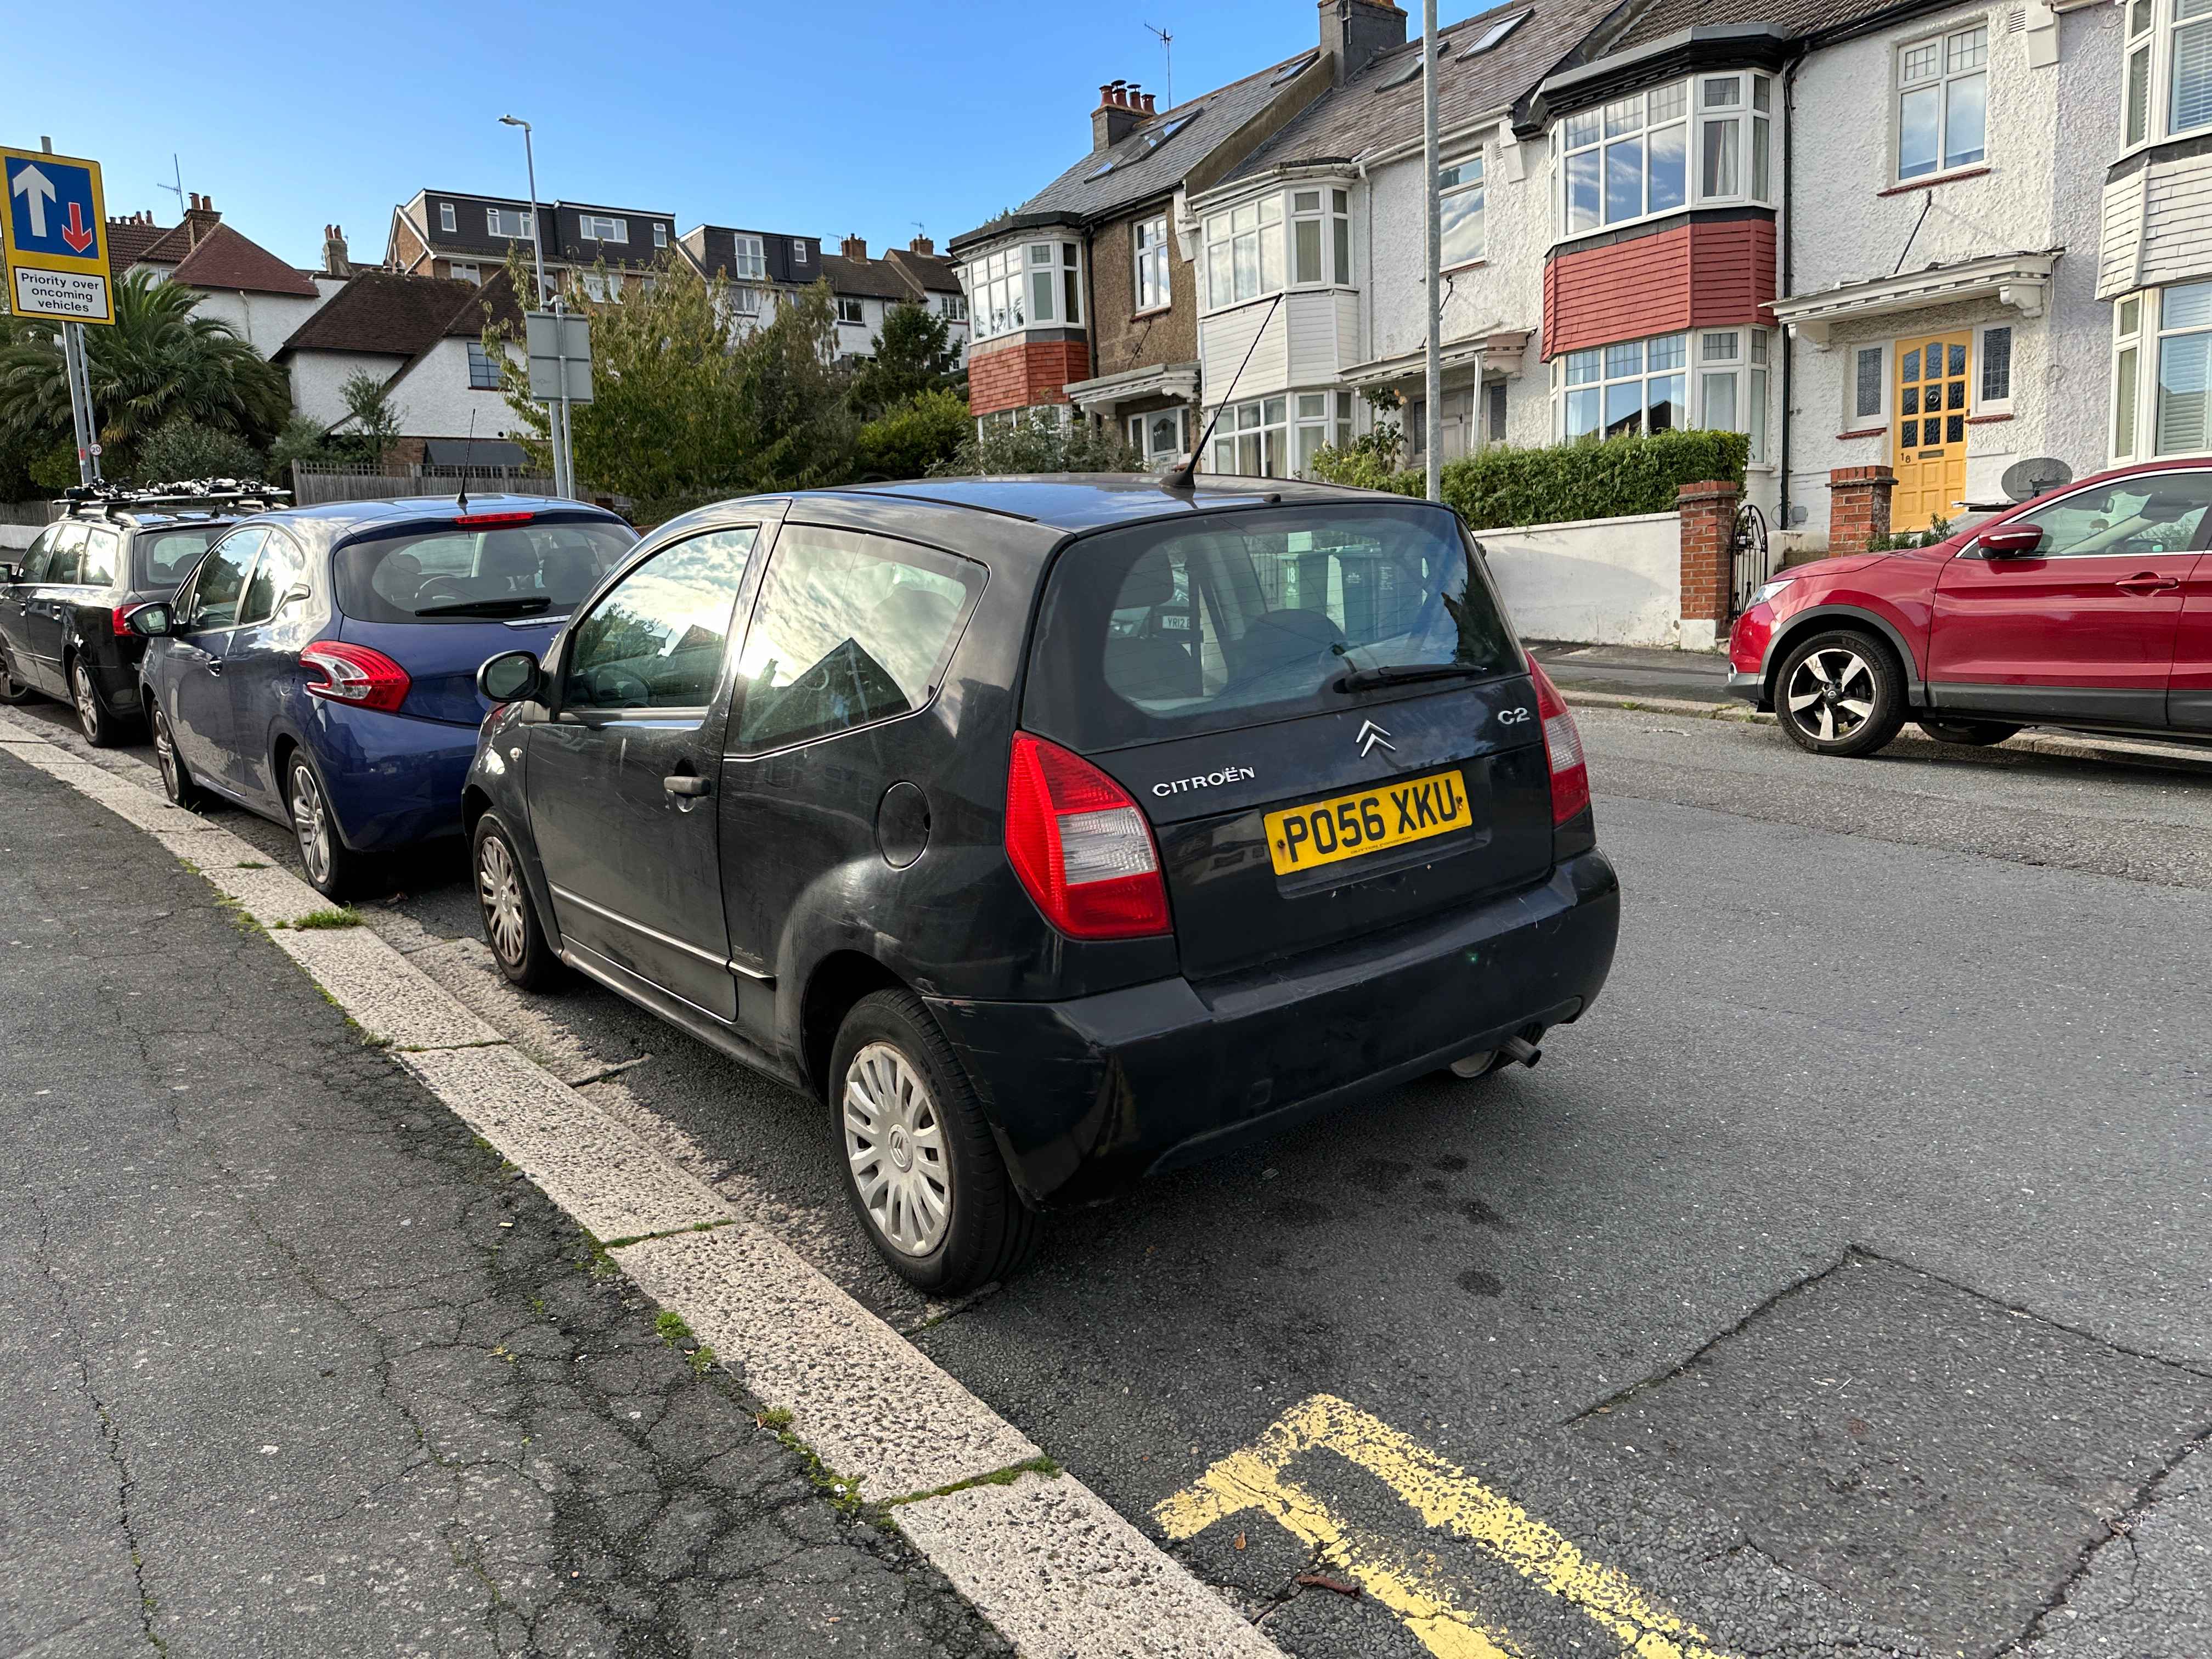 Photograph of PO56 XKU - a Black Citroen C2 parked in Hollingdean by a non-resident. The third of five photographs supplied by the residents of Hollingdean.